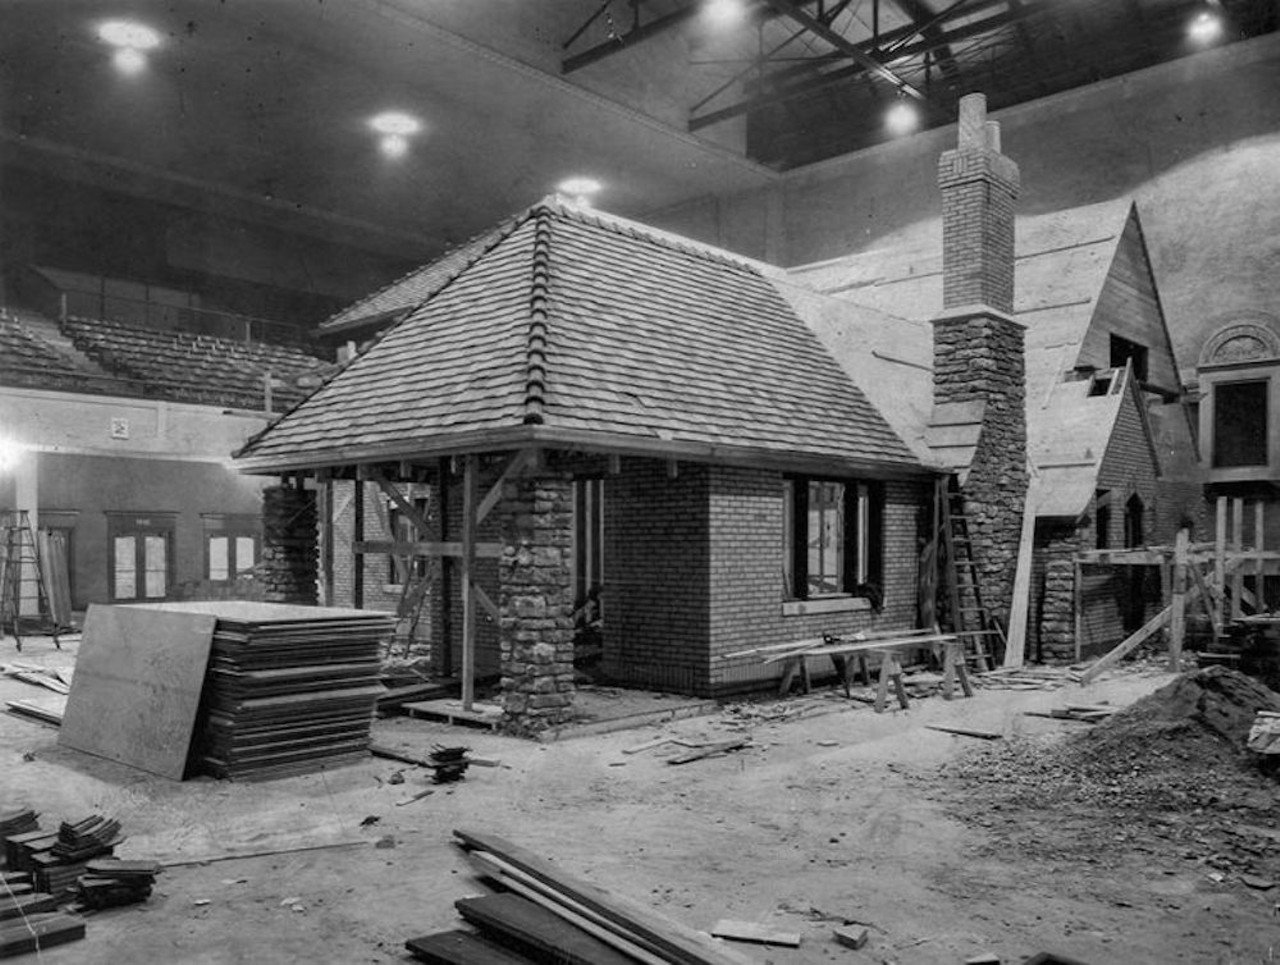 John J. Behle, manager of all the Home Beautiful Expositions, was hired to be the 1929 expo home's manager. He liked it so much, he bought it. The home was built at 4700 Reading Road in Bond Hill, but was demolished in the 1950s for construction of the Norwood Lateral Expressway.